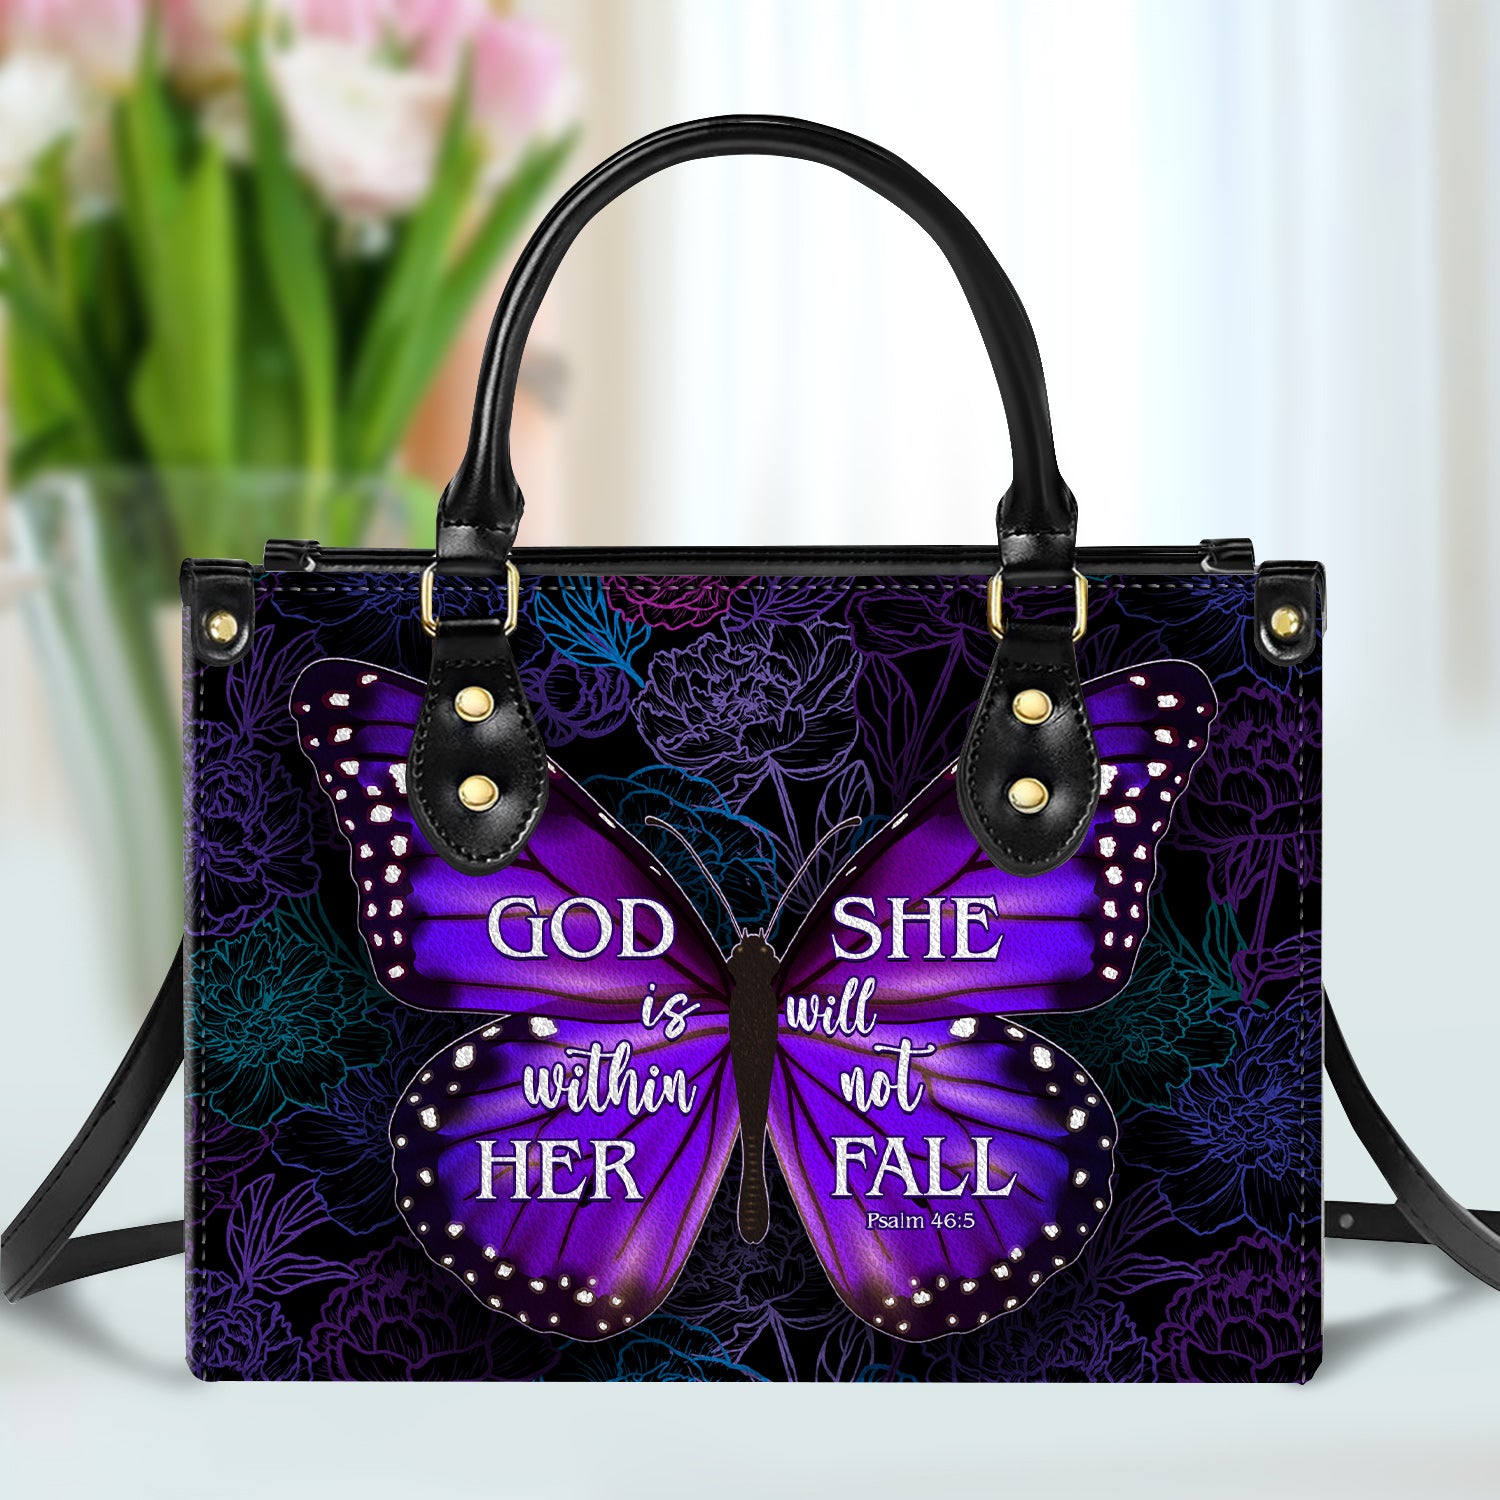 She Will Not Fall Personalized Zippered Leather Handbag With Handle Christian Gift Religious Gift For Women